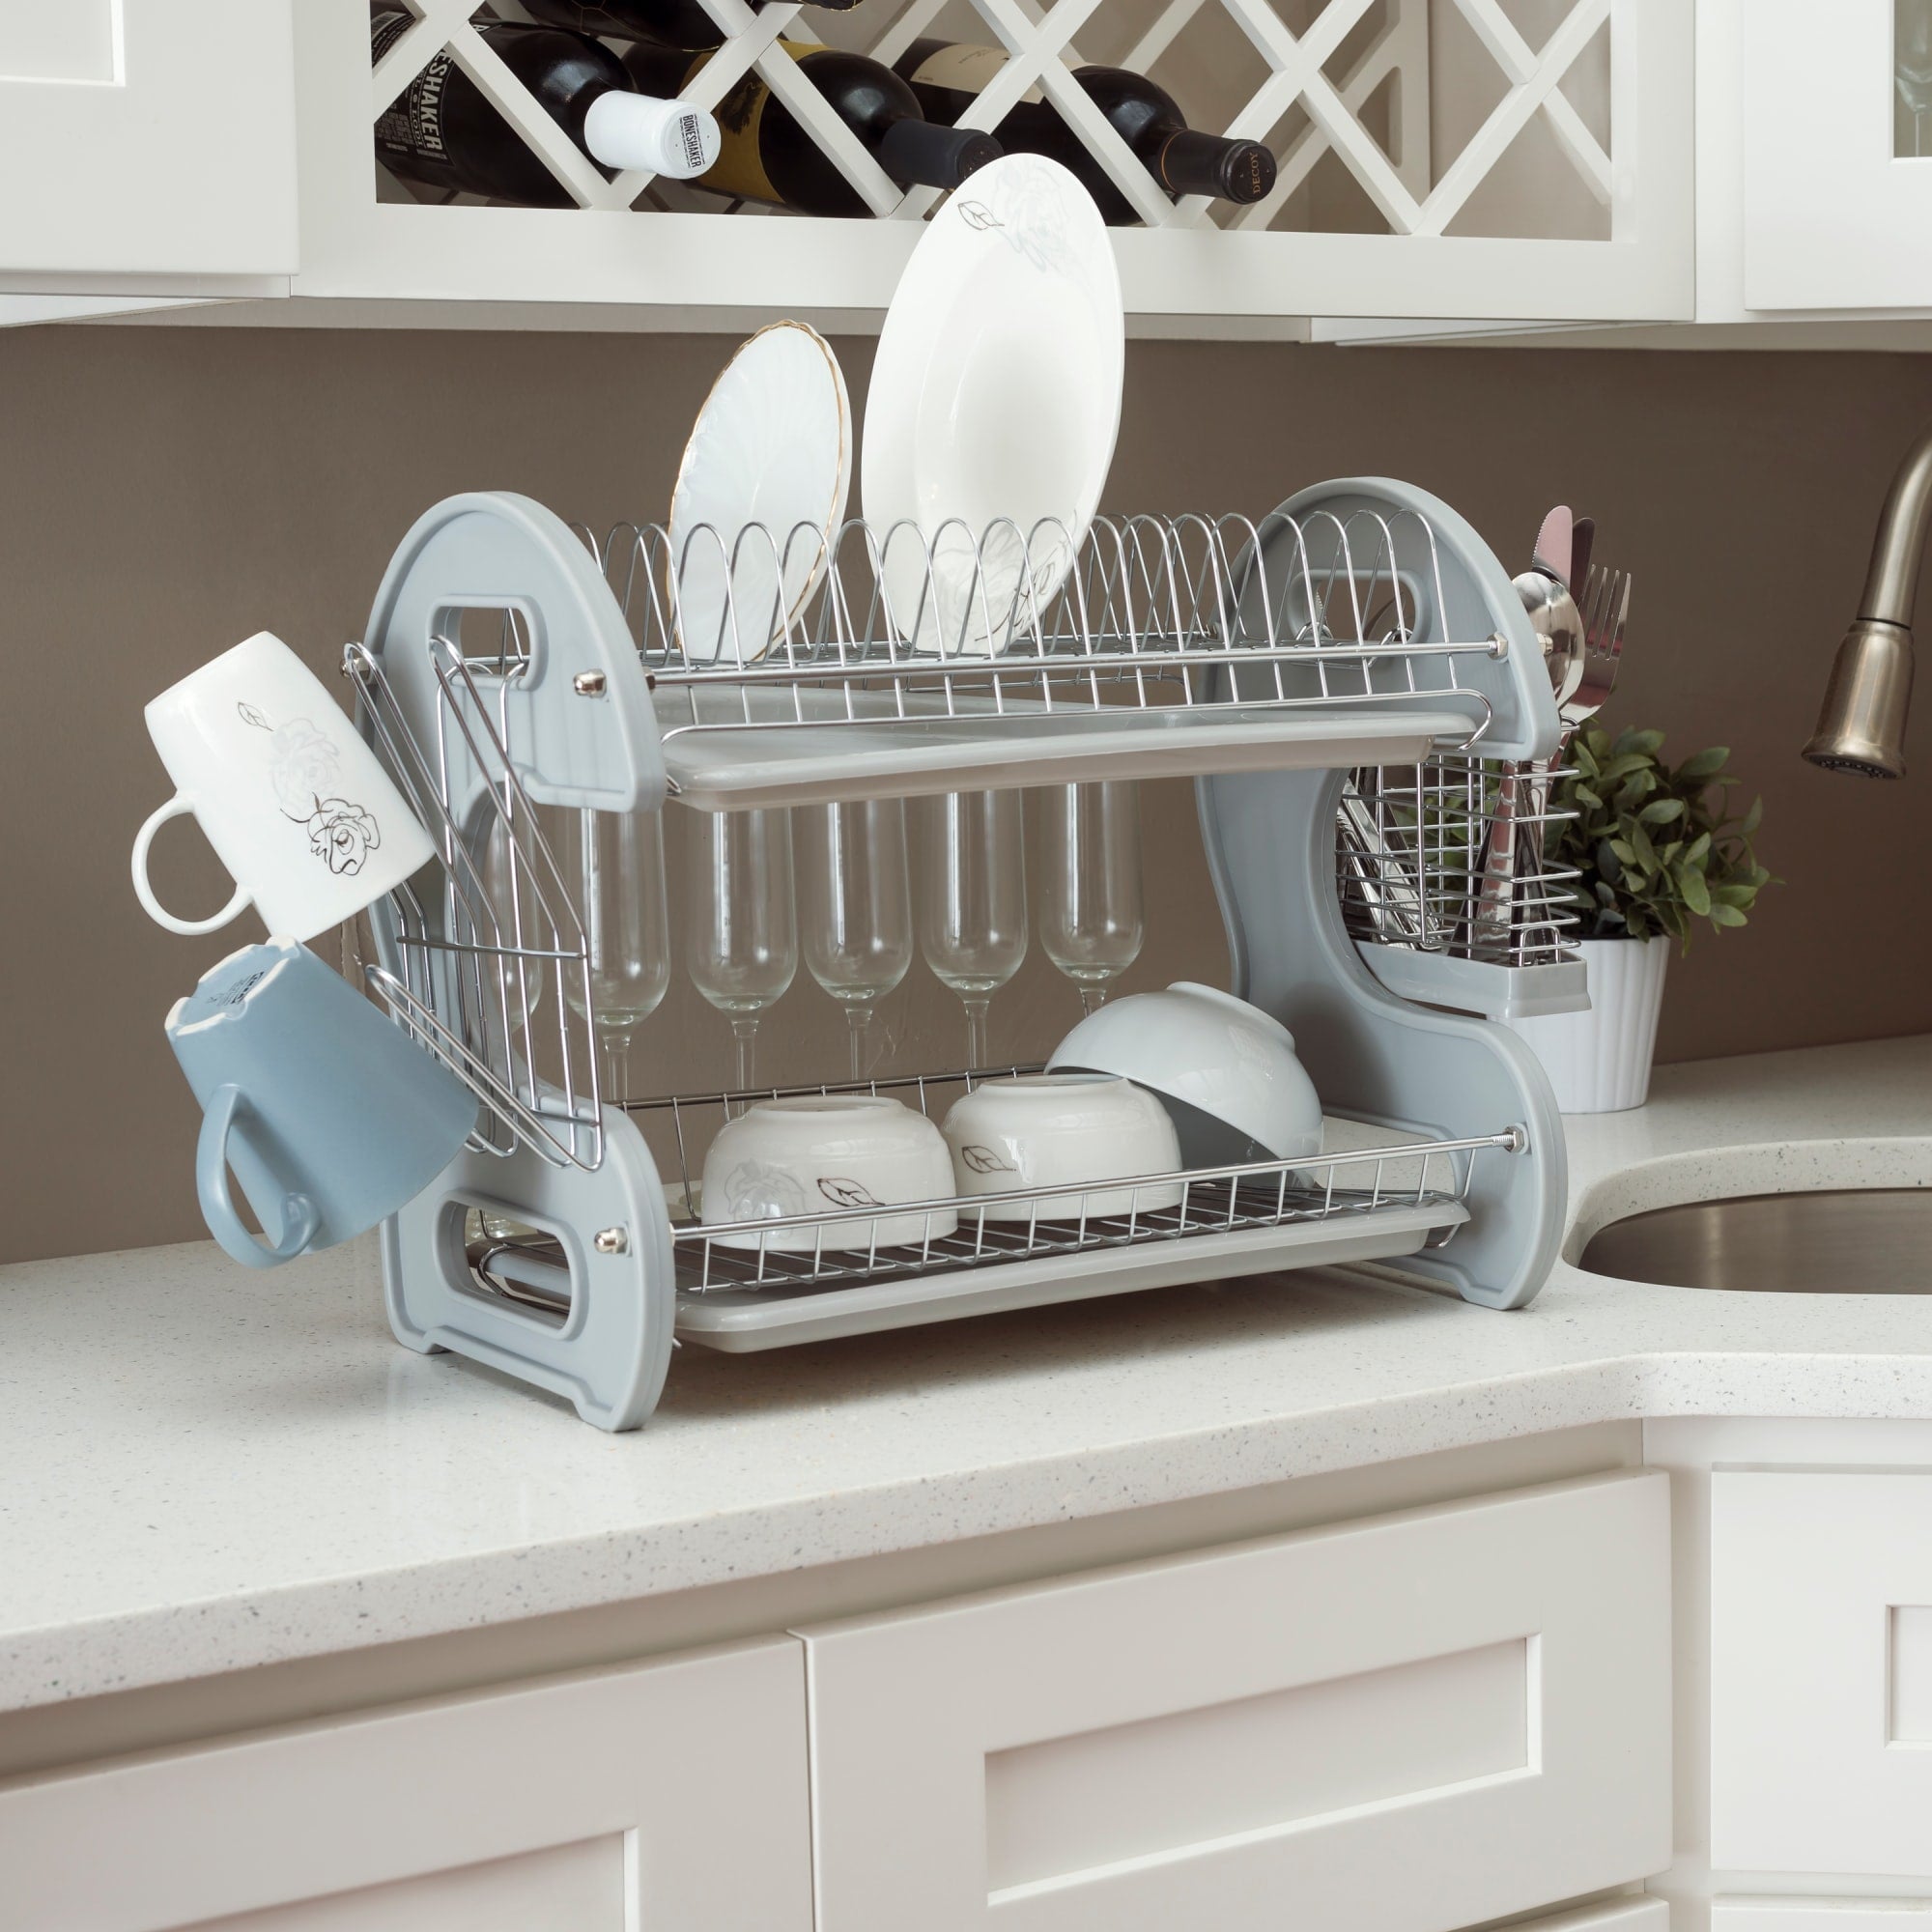 Home Basics S Shape  2 Tier Dish Drainer, Grey $20.00 EACH, CASE PACK OF 6